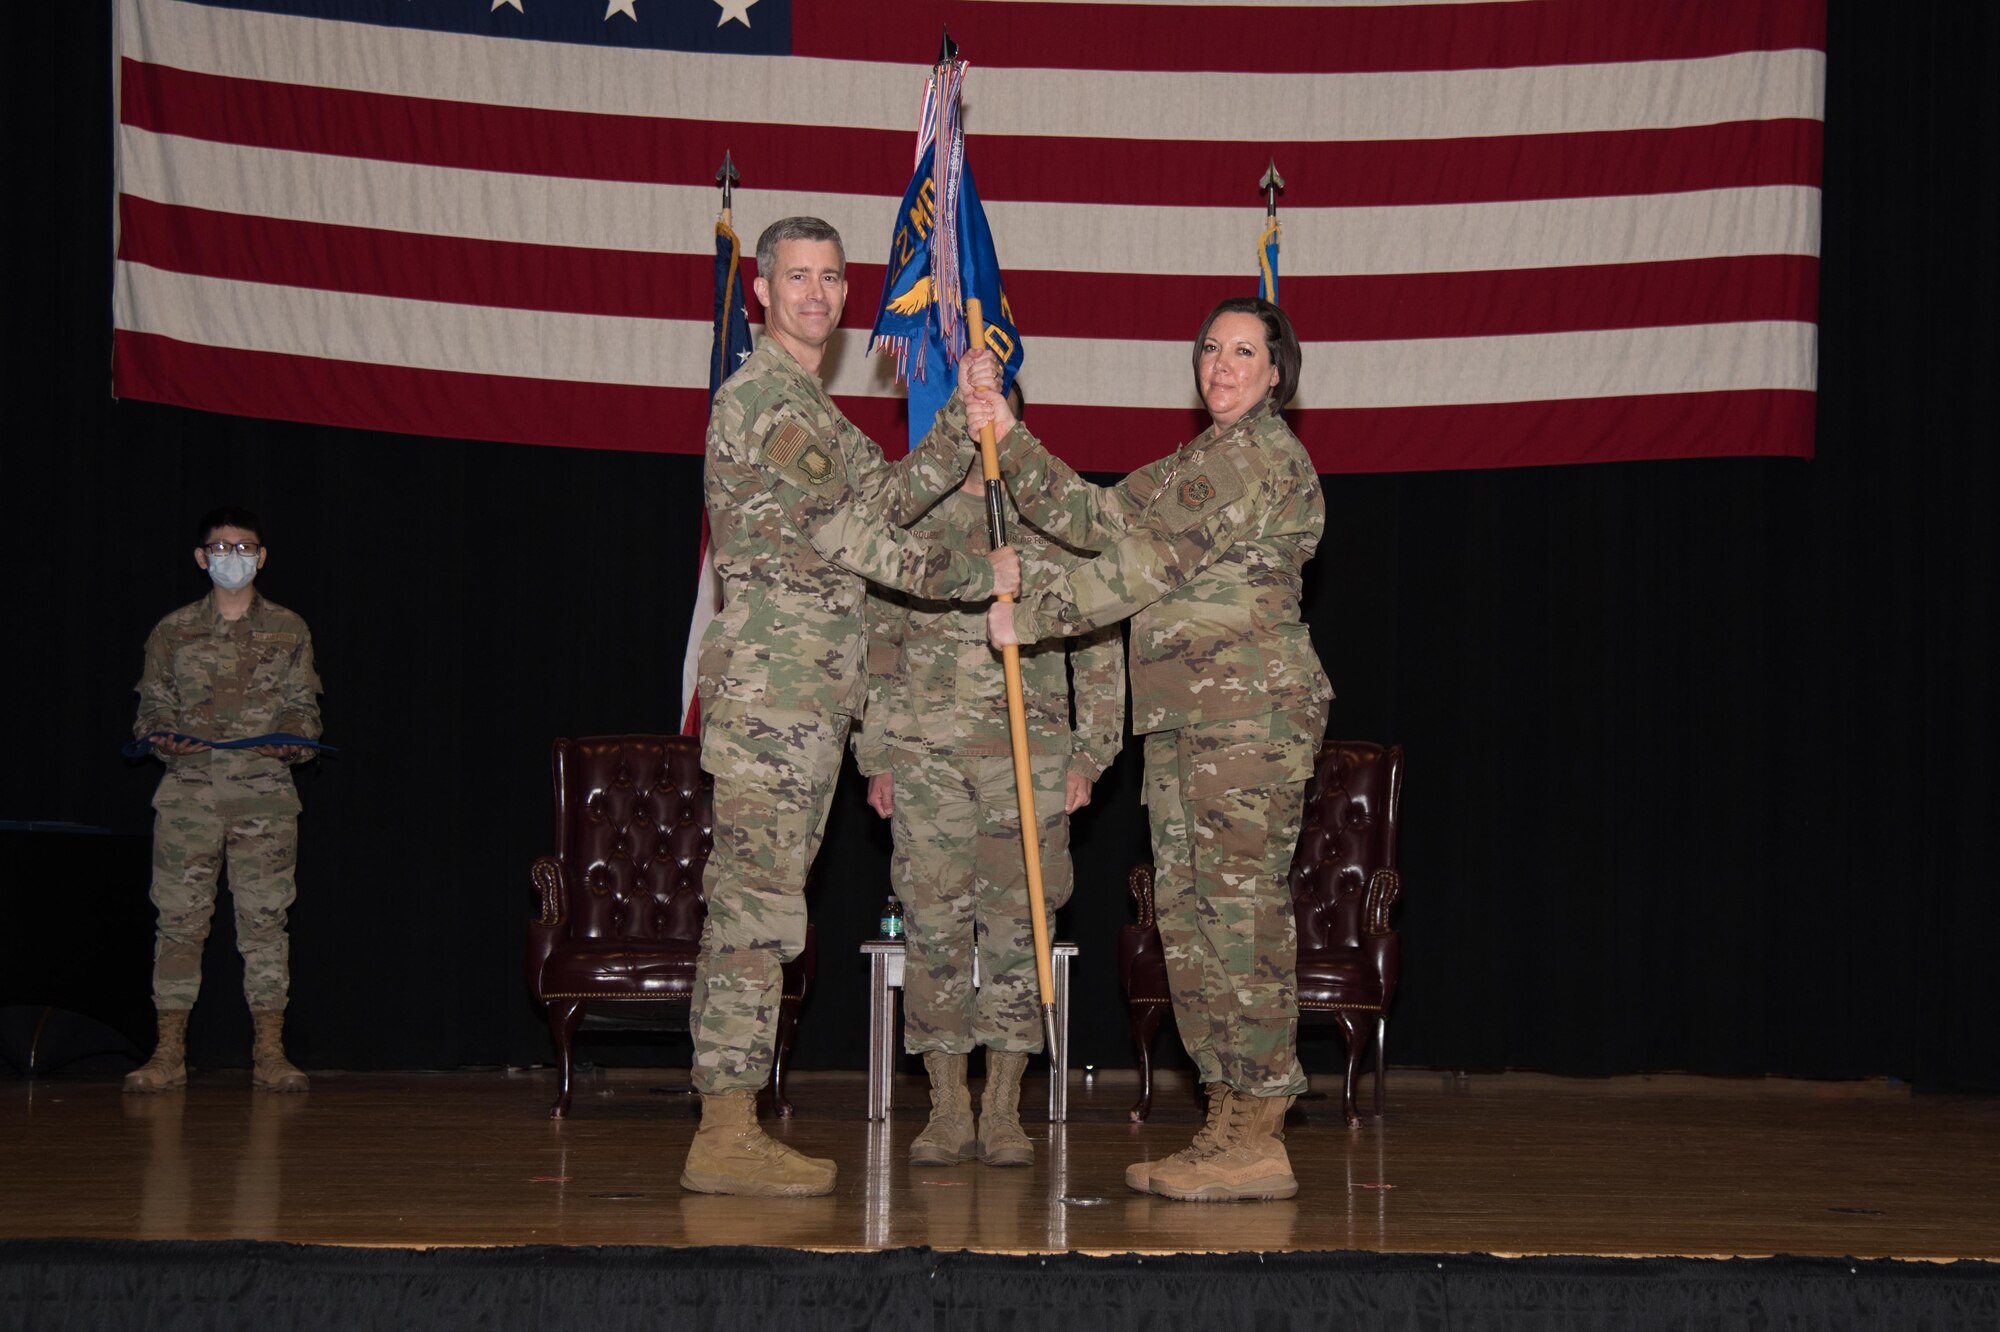 Lt. Col. Angela Yuhas, 22nd Medical Support Squadron outgoing commander, right, relinquishes command during an in-activation ceremony June 16, 2021, at McConnell Air Force Base, Kansas. During Yuhas’ command she led 98 Airmen over two years of service in the 22nd Medical Group. The in-activation ceremony was held in order to merge the squadron with the 22nd Healthcare Operations Squadron. (U.S. Air Force photo by Senior Airman Alexi Bosarge)